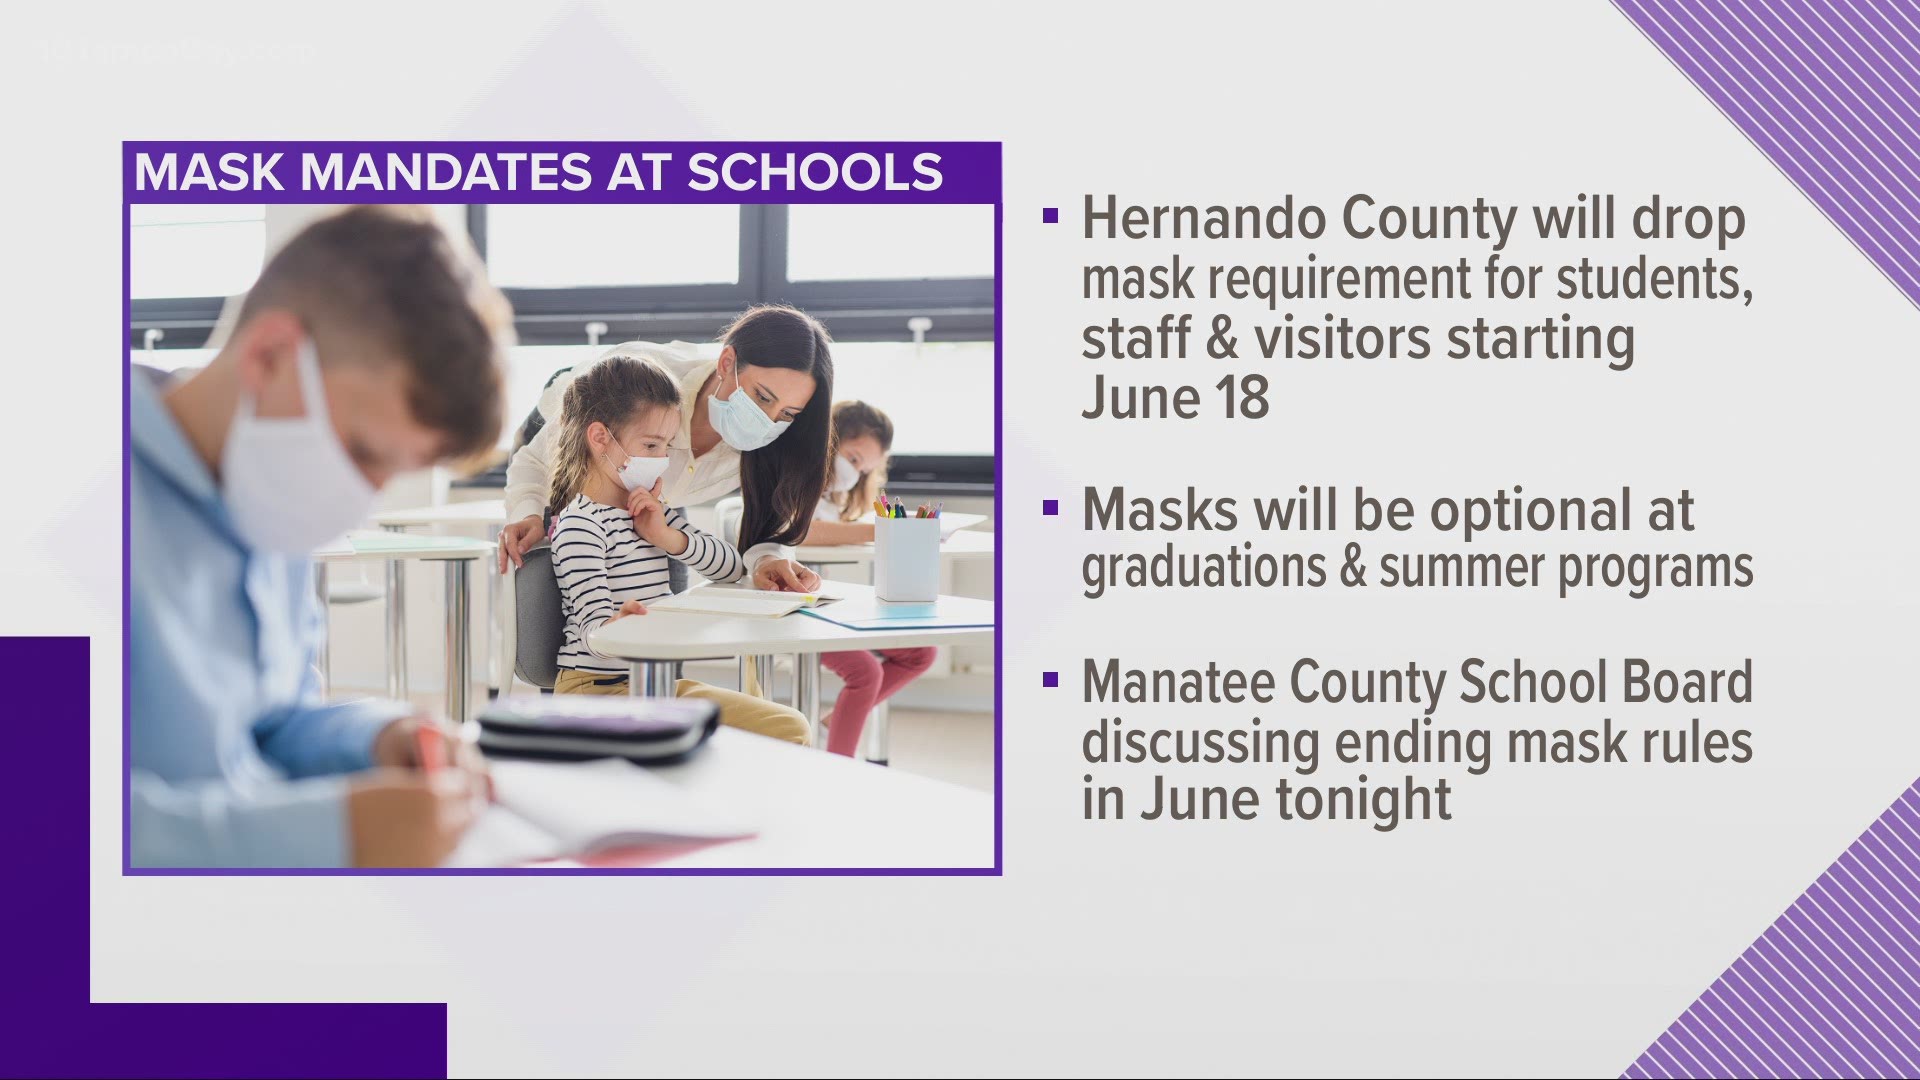 The school district joins several others in Florida that have made the decision to forego masks next school year.